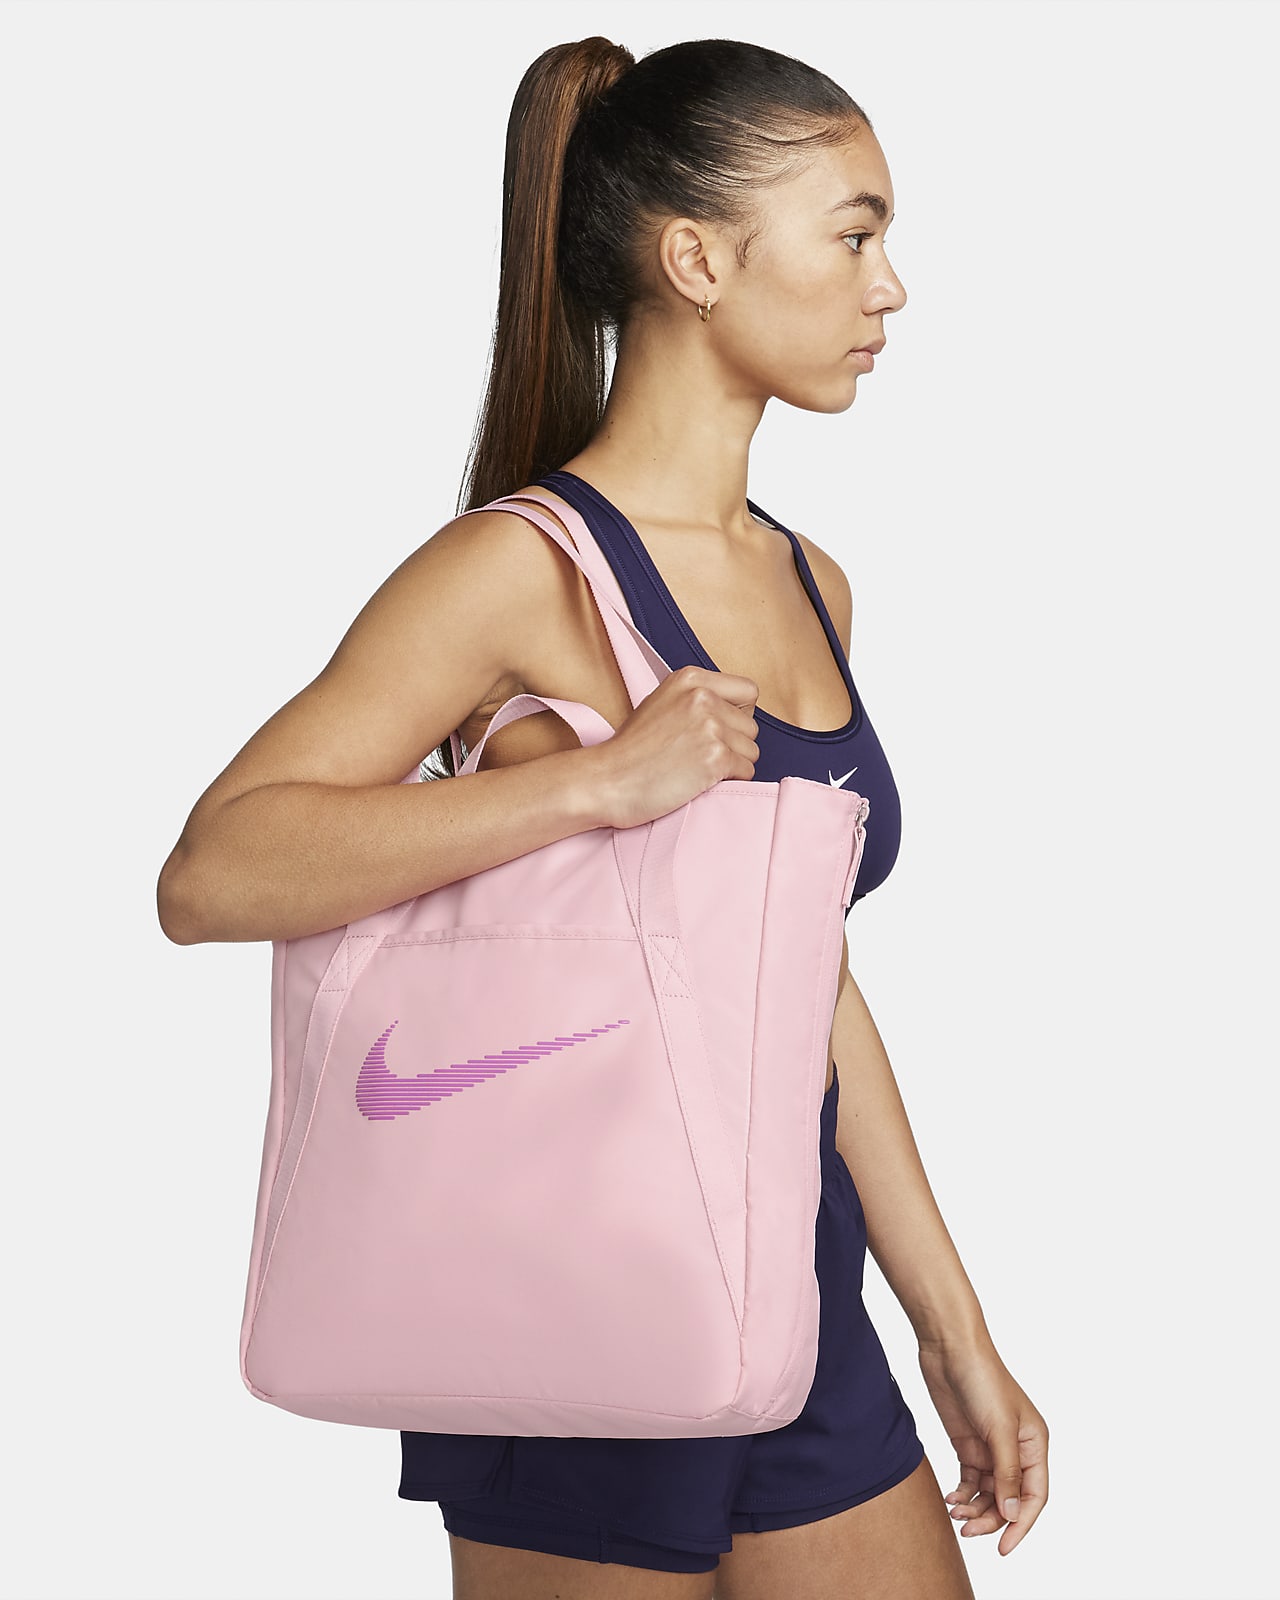 23 Best Gym Bags to Round Out Your Workout Ensemble | Vogue